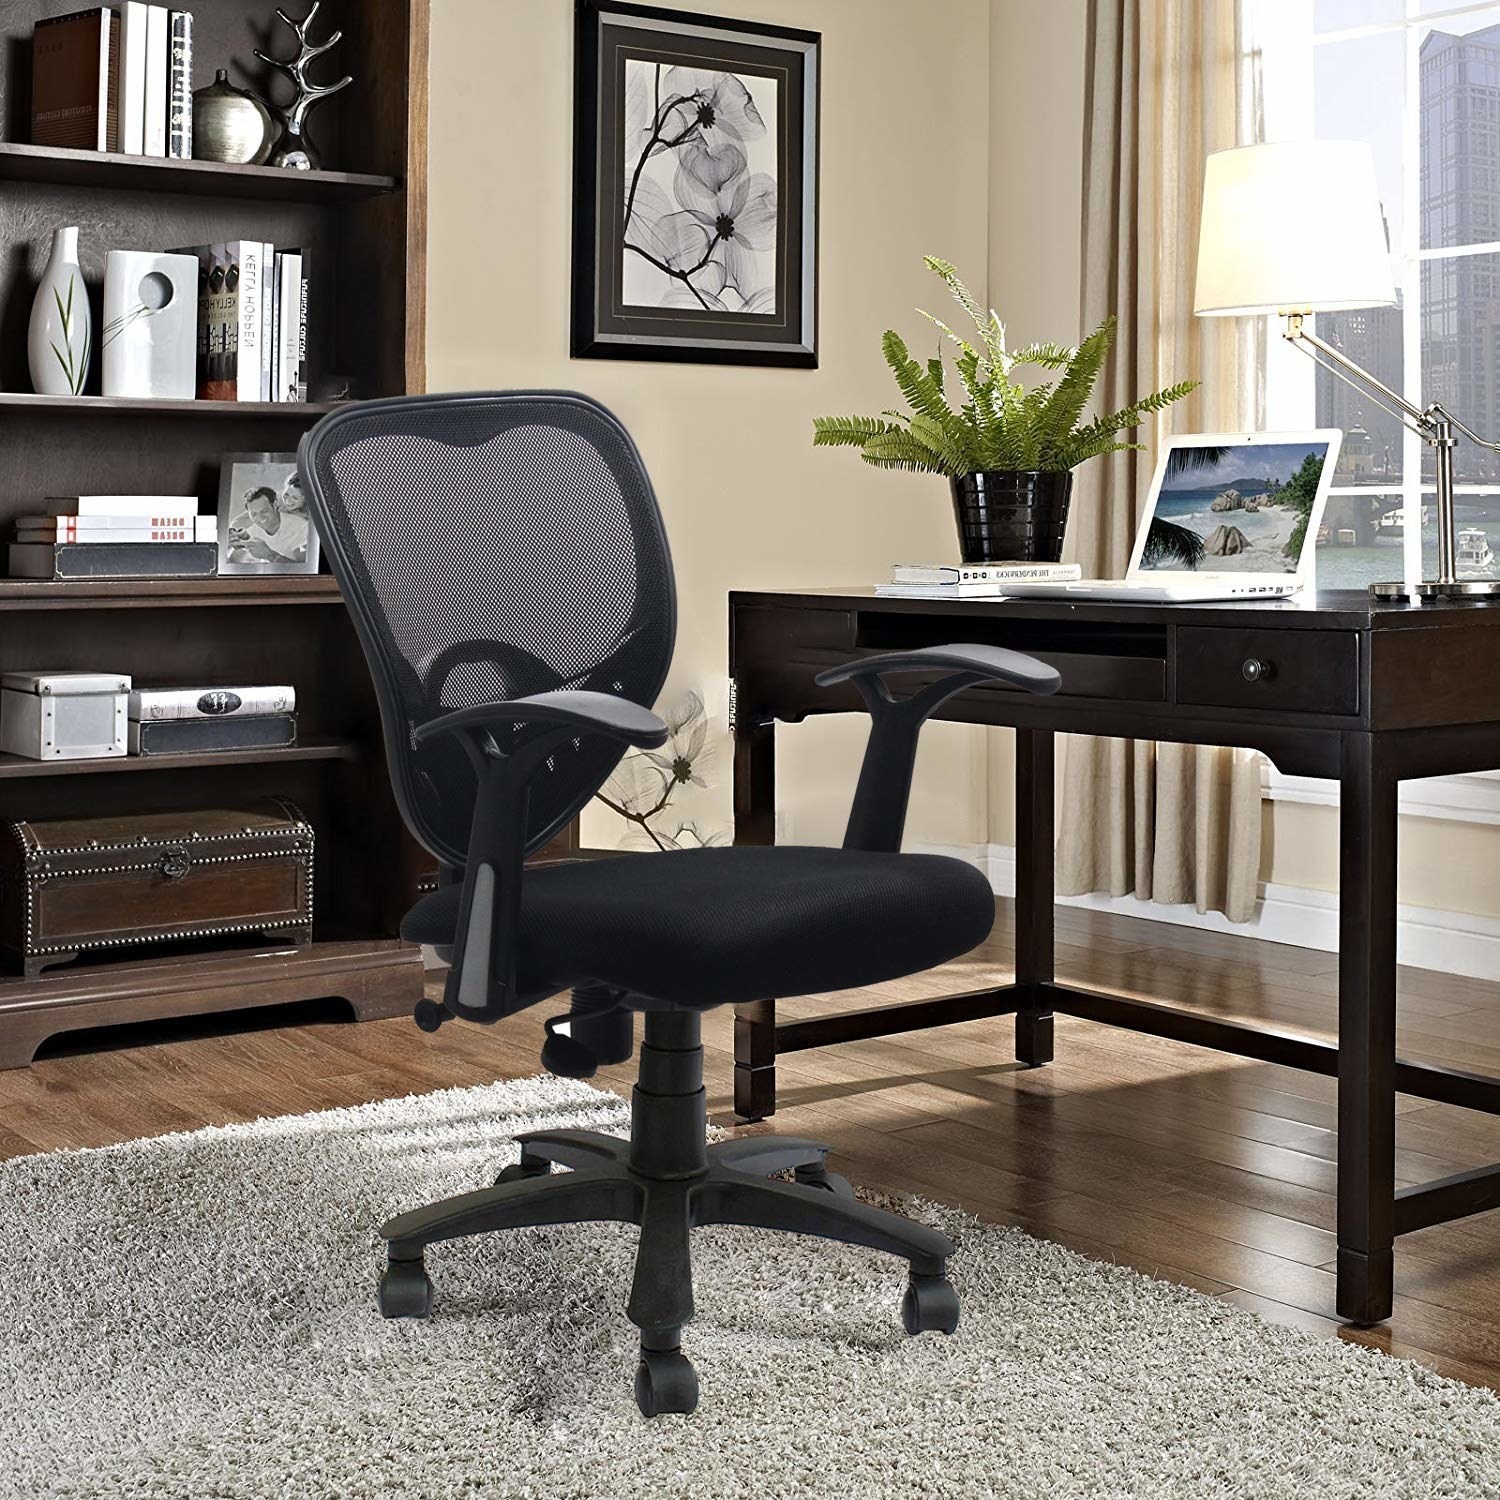 15 of the most comfortable and ergonomic home office chairs